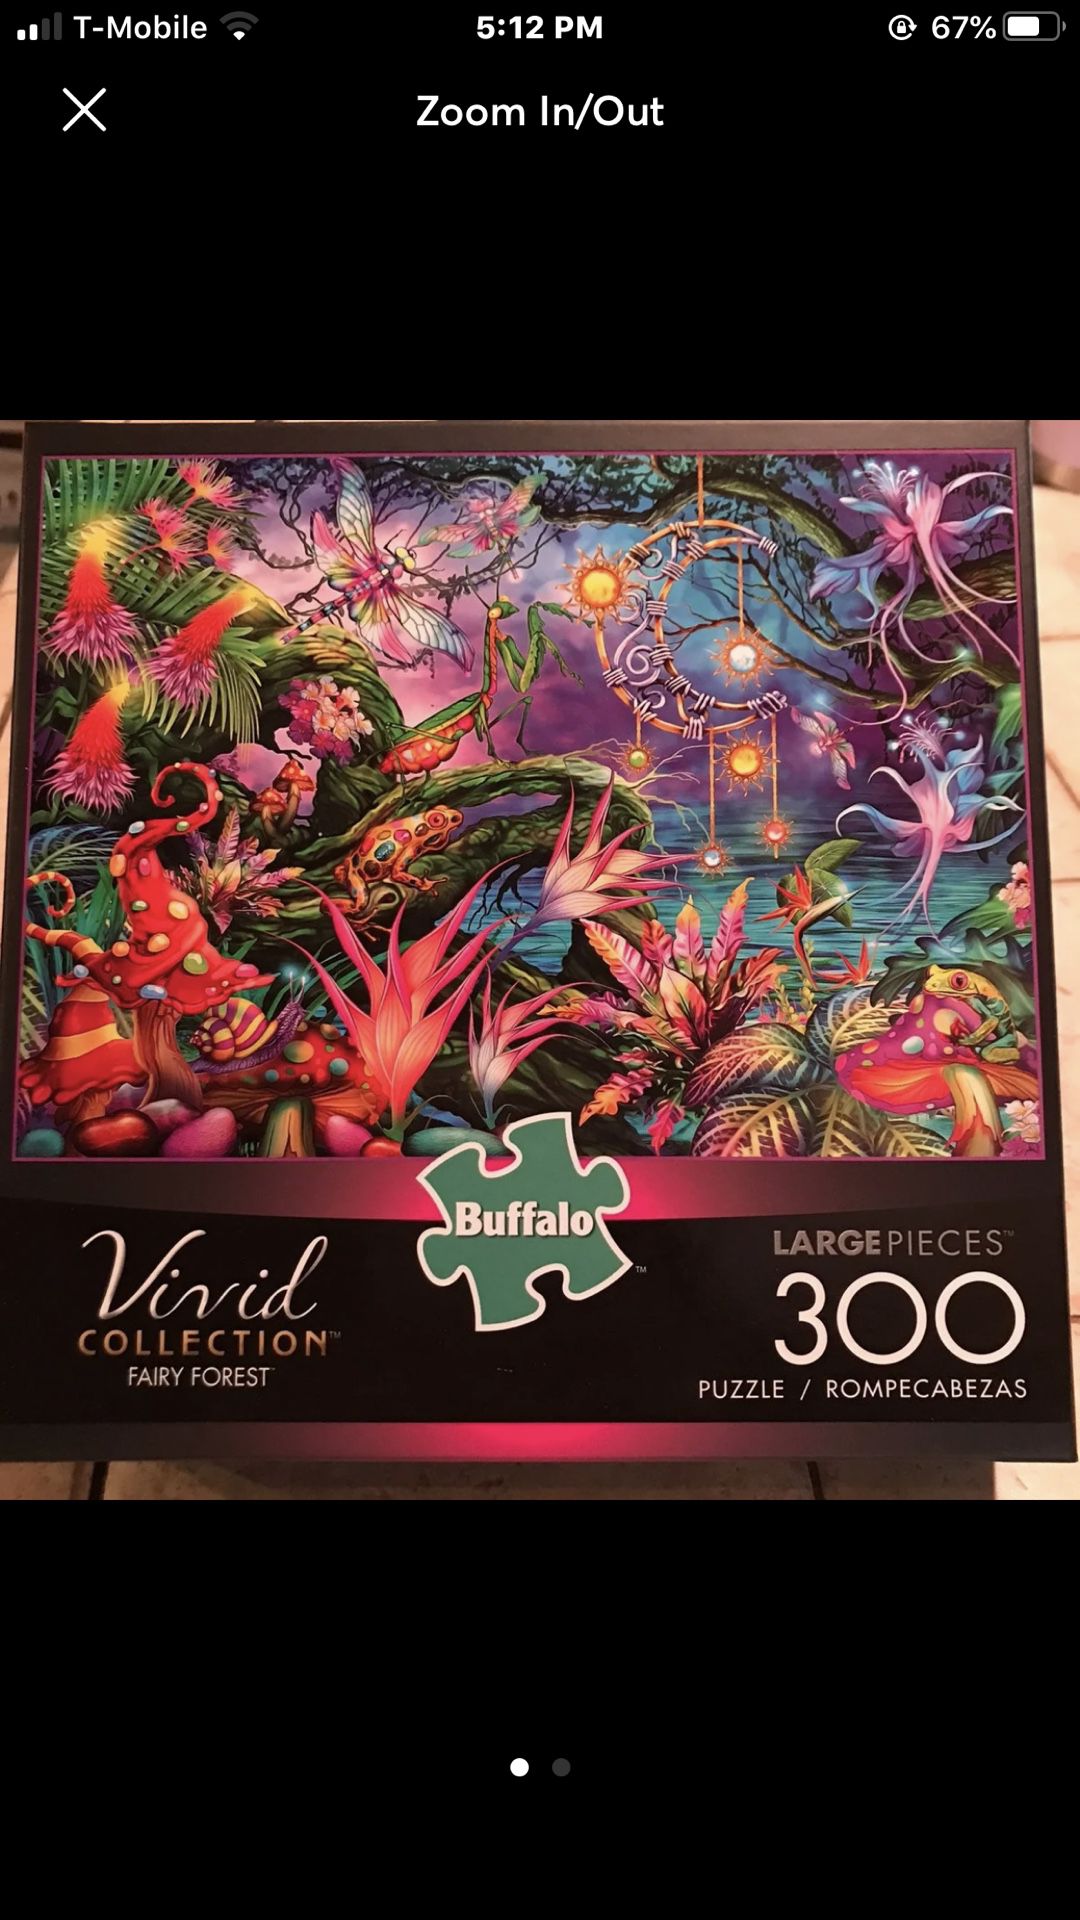 NEW!!! 300 Large Piece Puzzle FAIRY FOREST